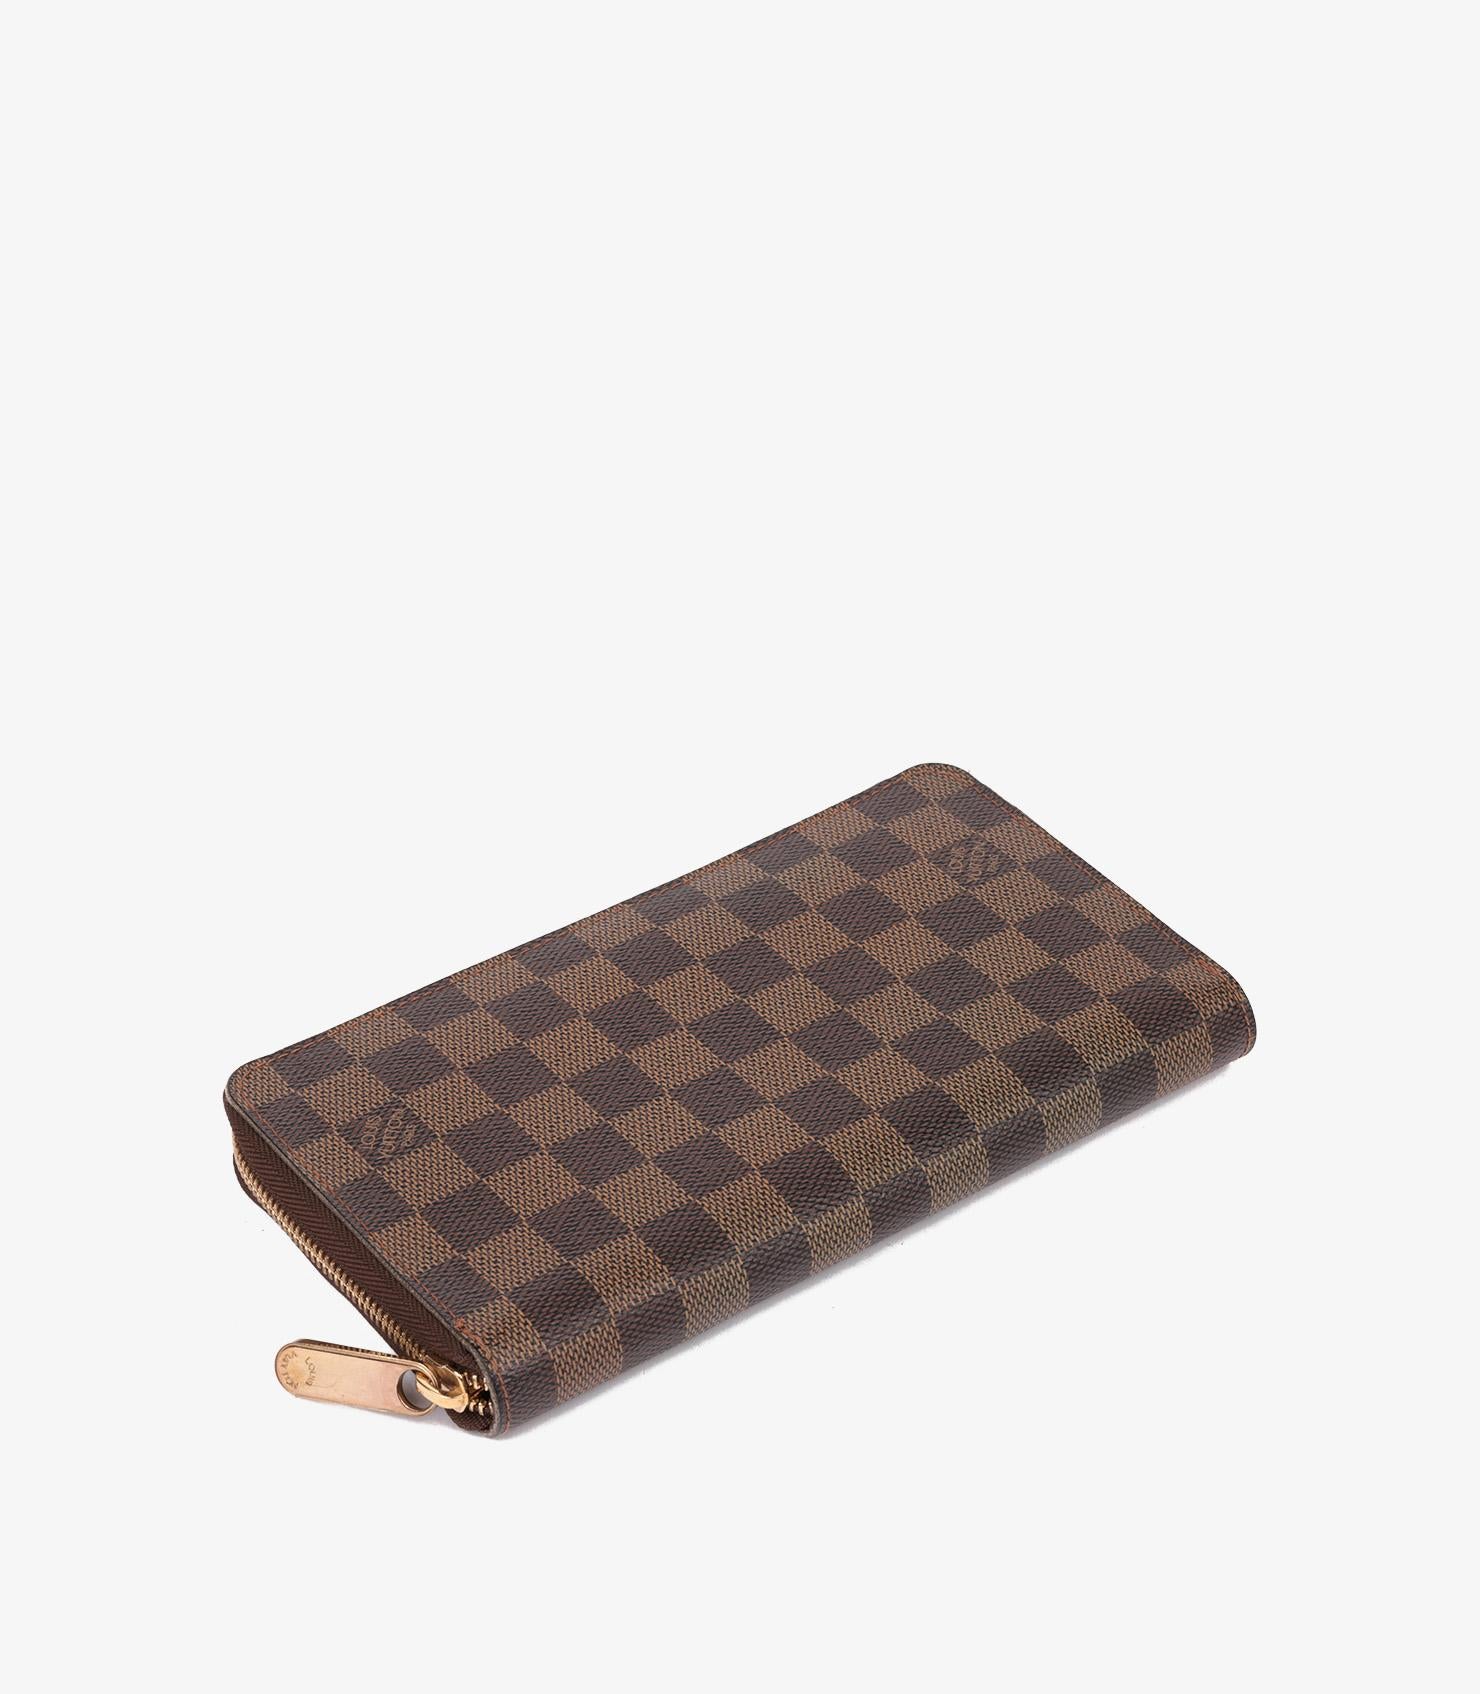 Louis Vuitton Damier Ebene Coated Canvas Zippy Organiser

Brand- Louis Vuitton
Model- Zippy Organiser
Product Type- Wallet
Serial Number- VI****
Colour- Damier Ebene
Hardware- Gold
Material(s)- Coated Canvas
Authenticity Details- Date Stamp

Height-